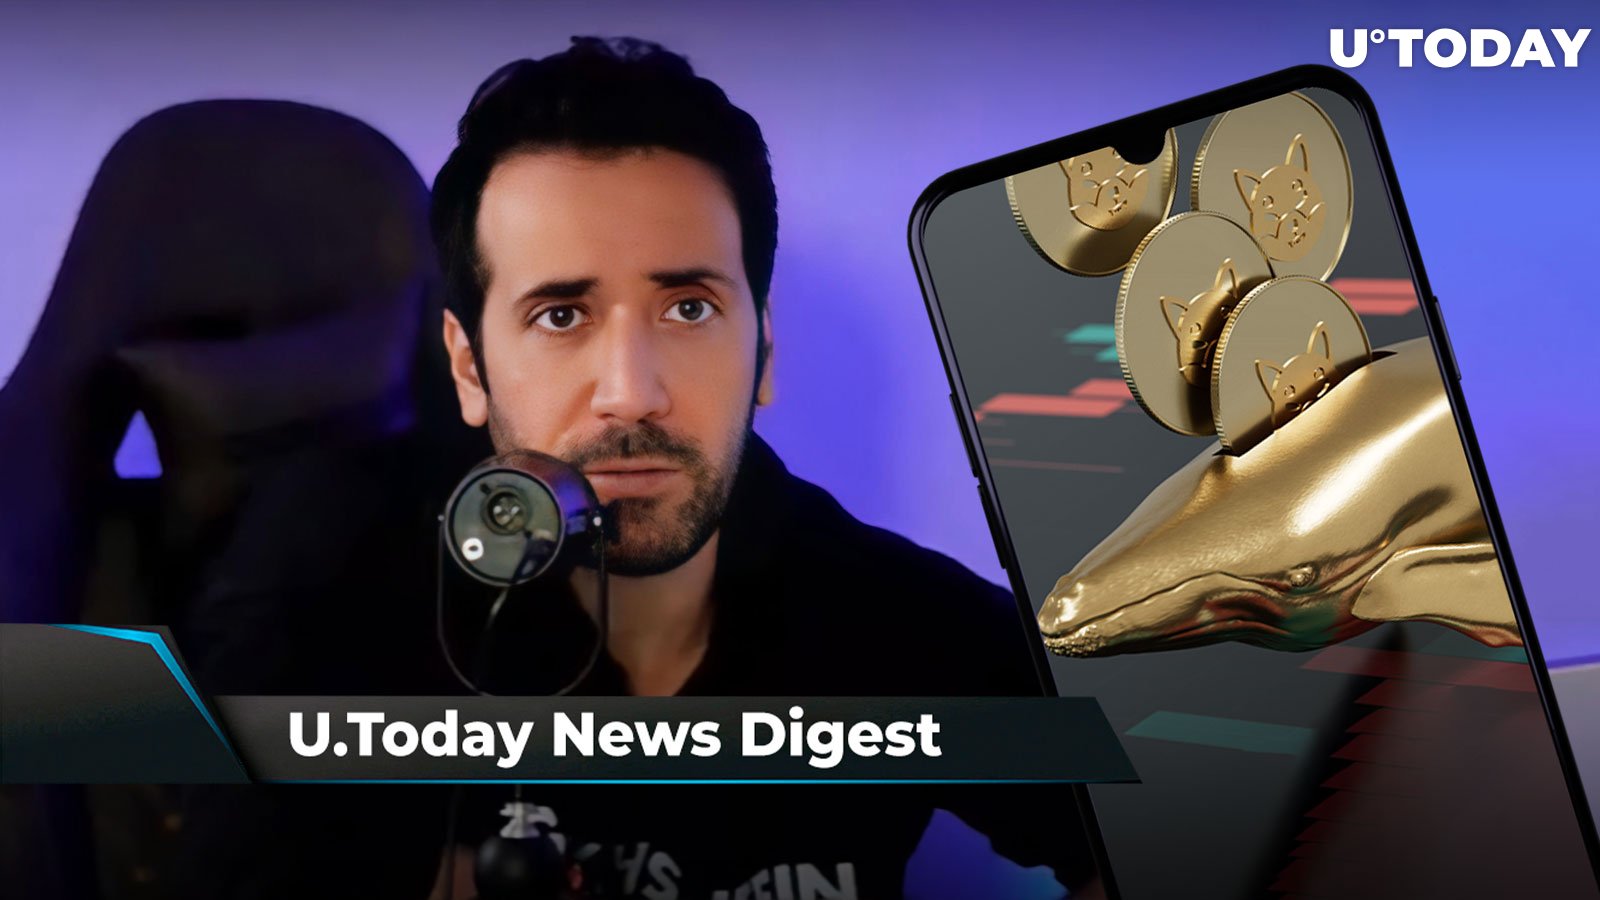 David Gokhshtein to “Go Out and Buy SHIB,” Cardano Founder Speaks on Musk, DOGE and Twitter, Whales Move 4.2 Trillion SHIB: Crypto News Digest by U.Today